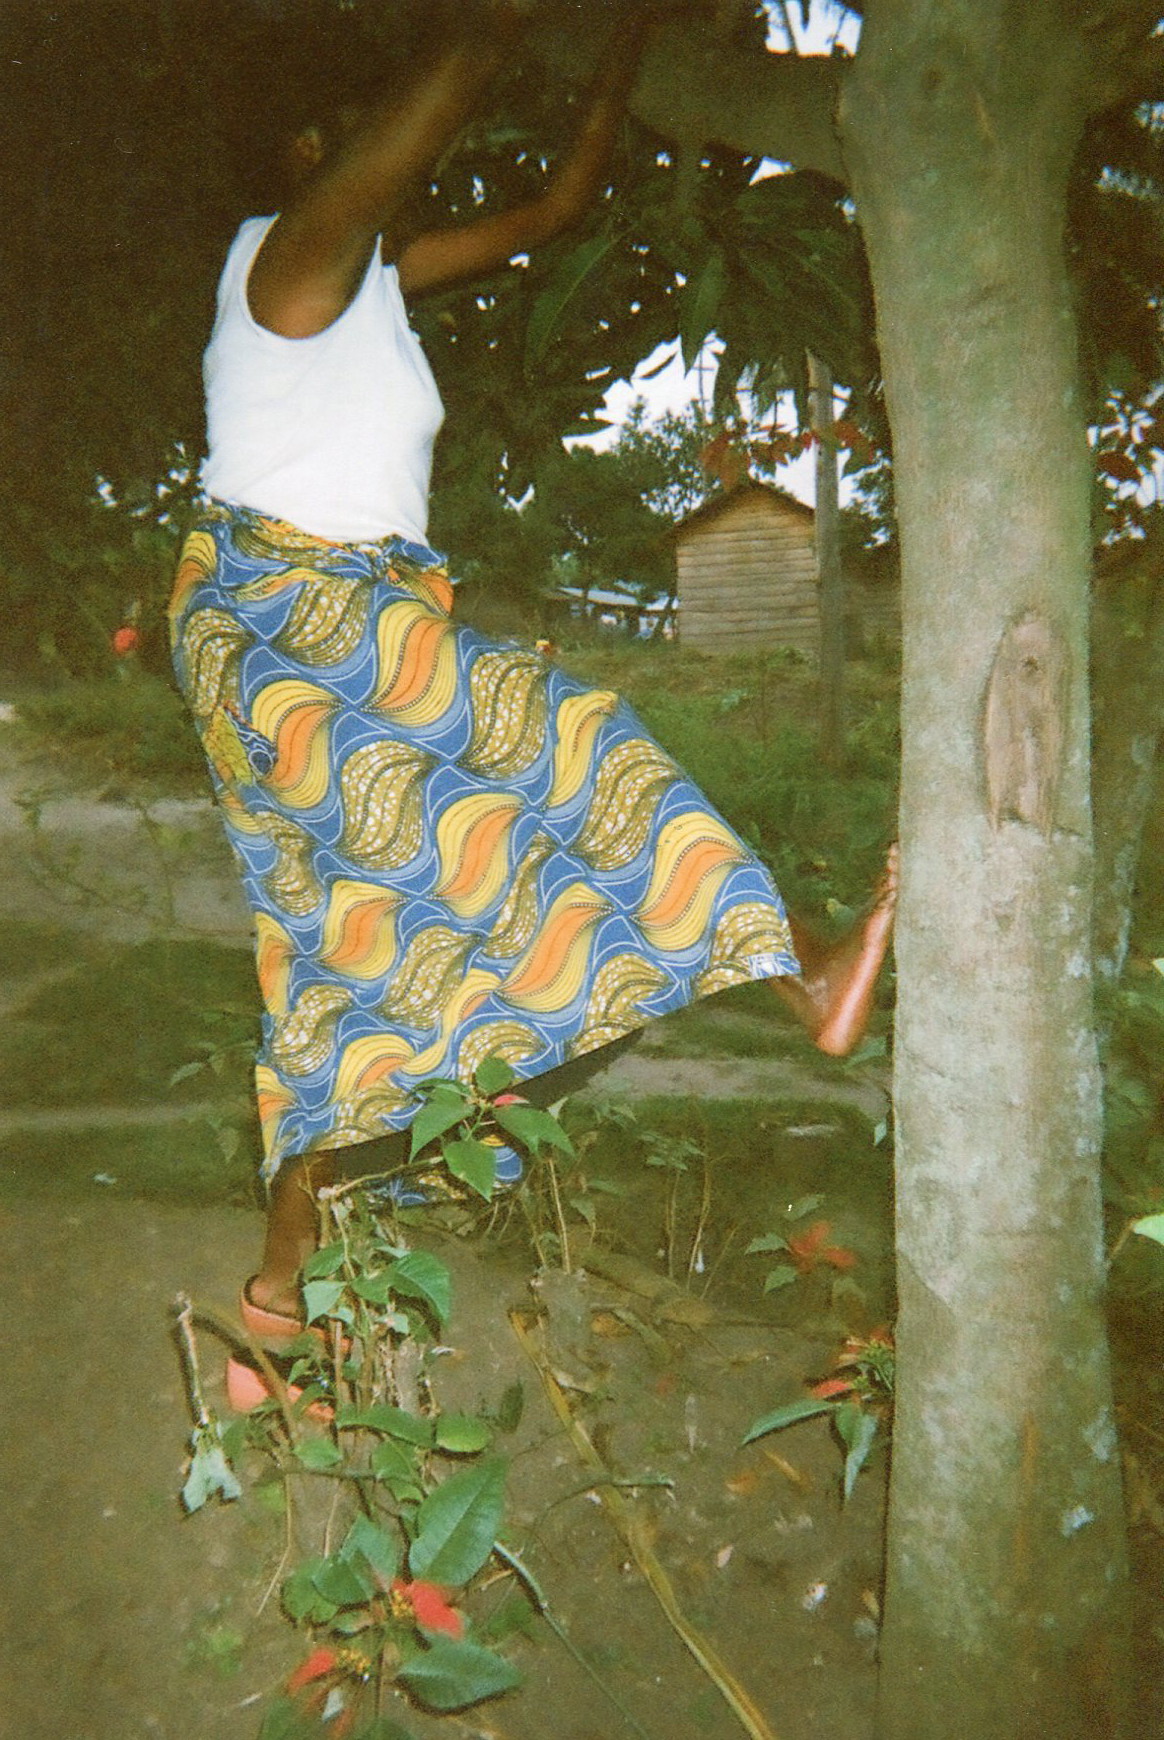  I jumped on a tree to cut mangoes because I was very hungry. When they saw me I was beaten to death.&nbsp; 